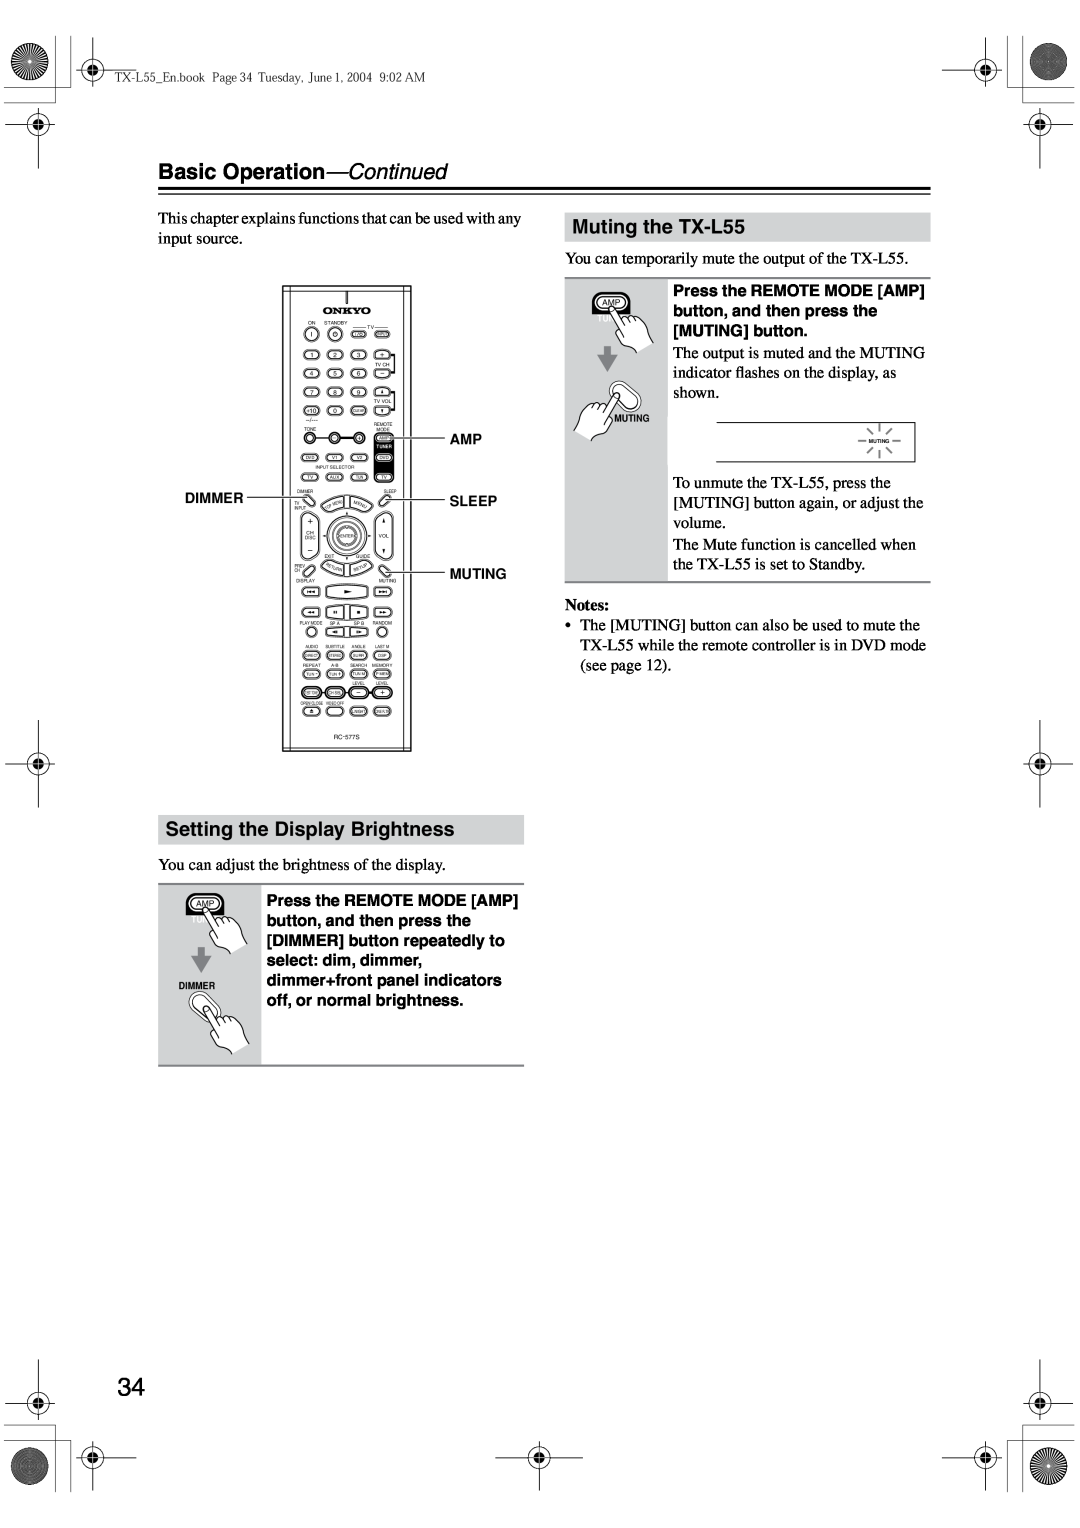 Onkyo instruction manual Basic Operation-Continued, Muting the TX-L55, Setting the Display Brightness 